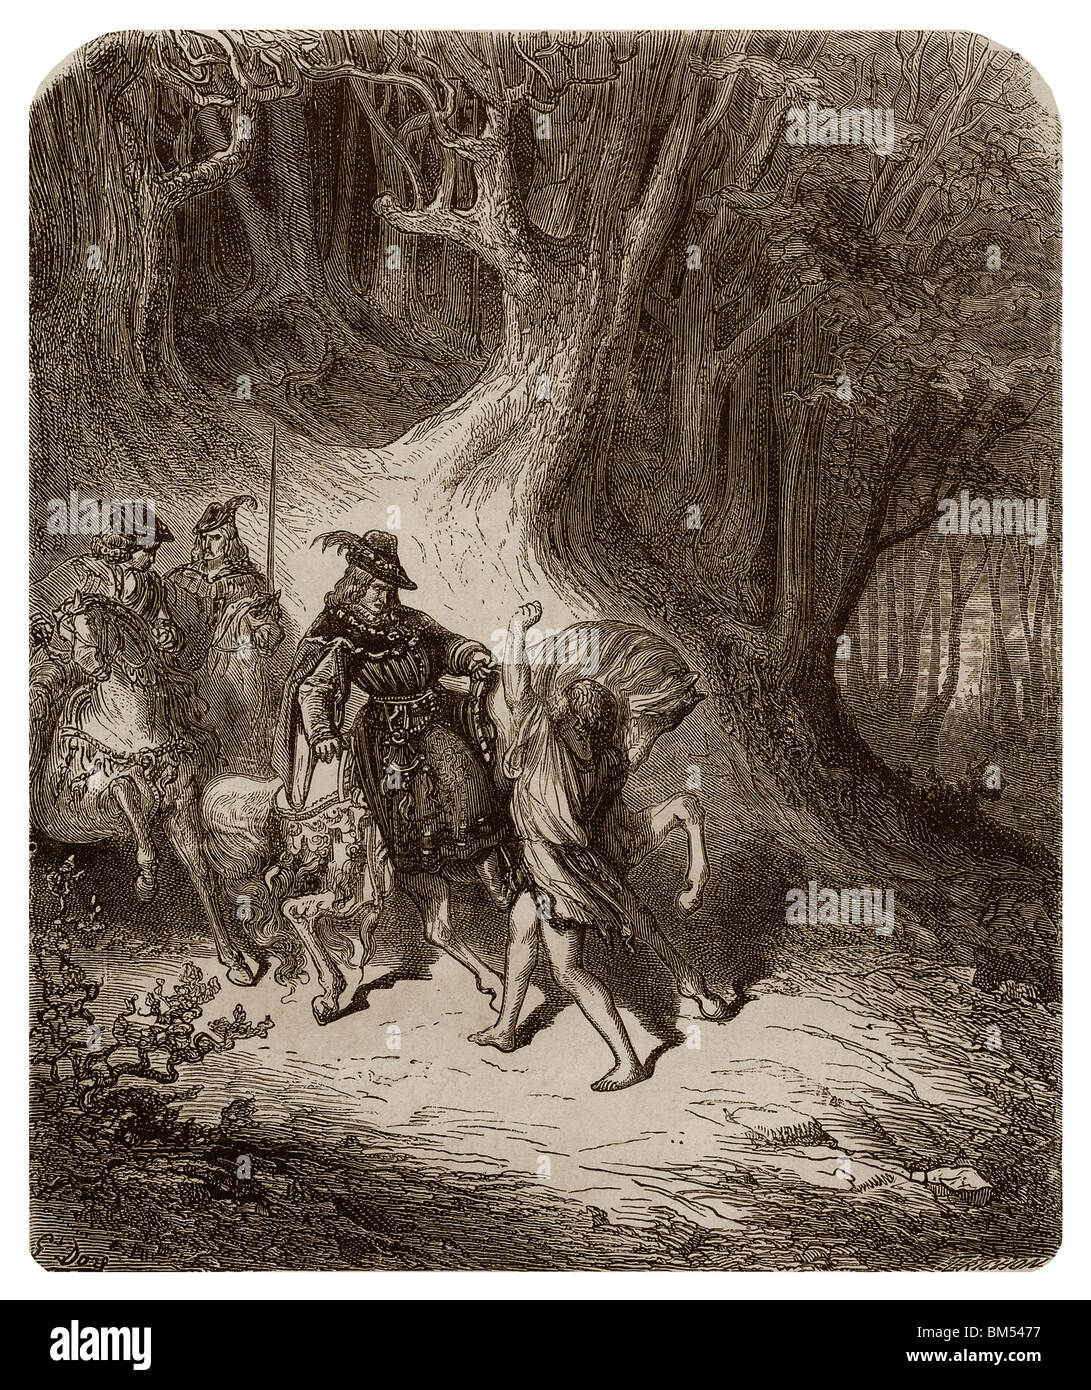 In August 1392, in the forest of Mans, a man grabbed at the bridle of King Charles VI of France's horse. Stock Photo